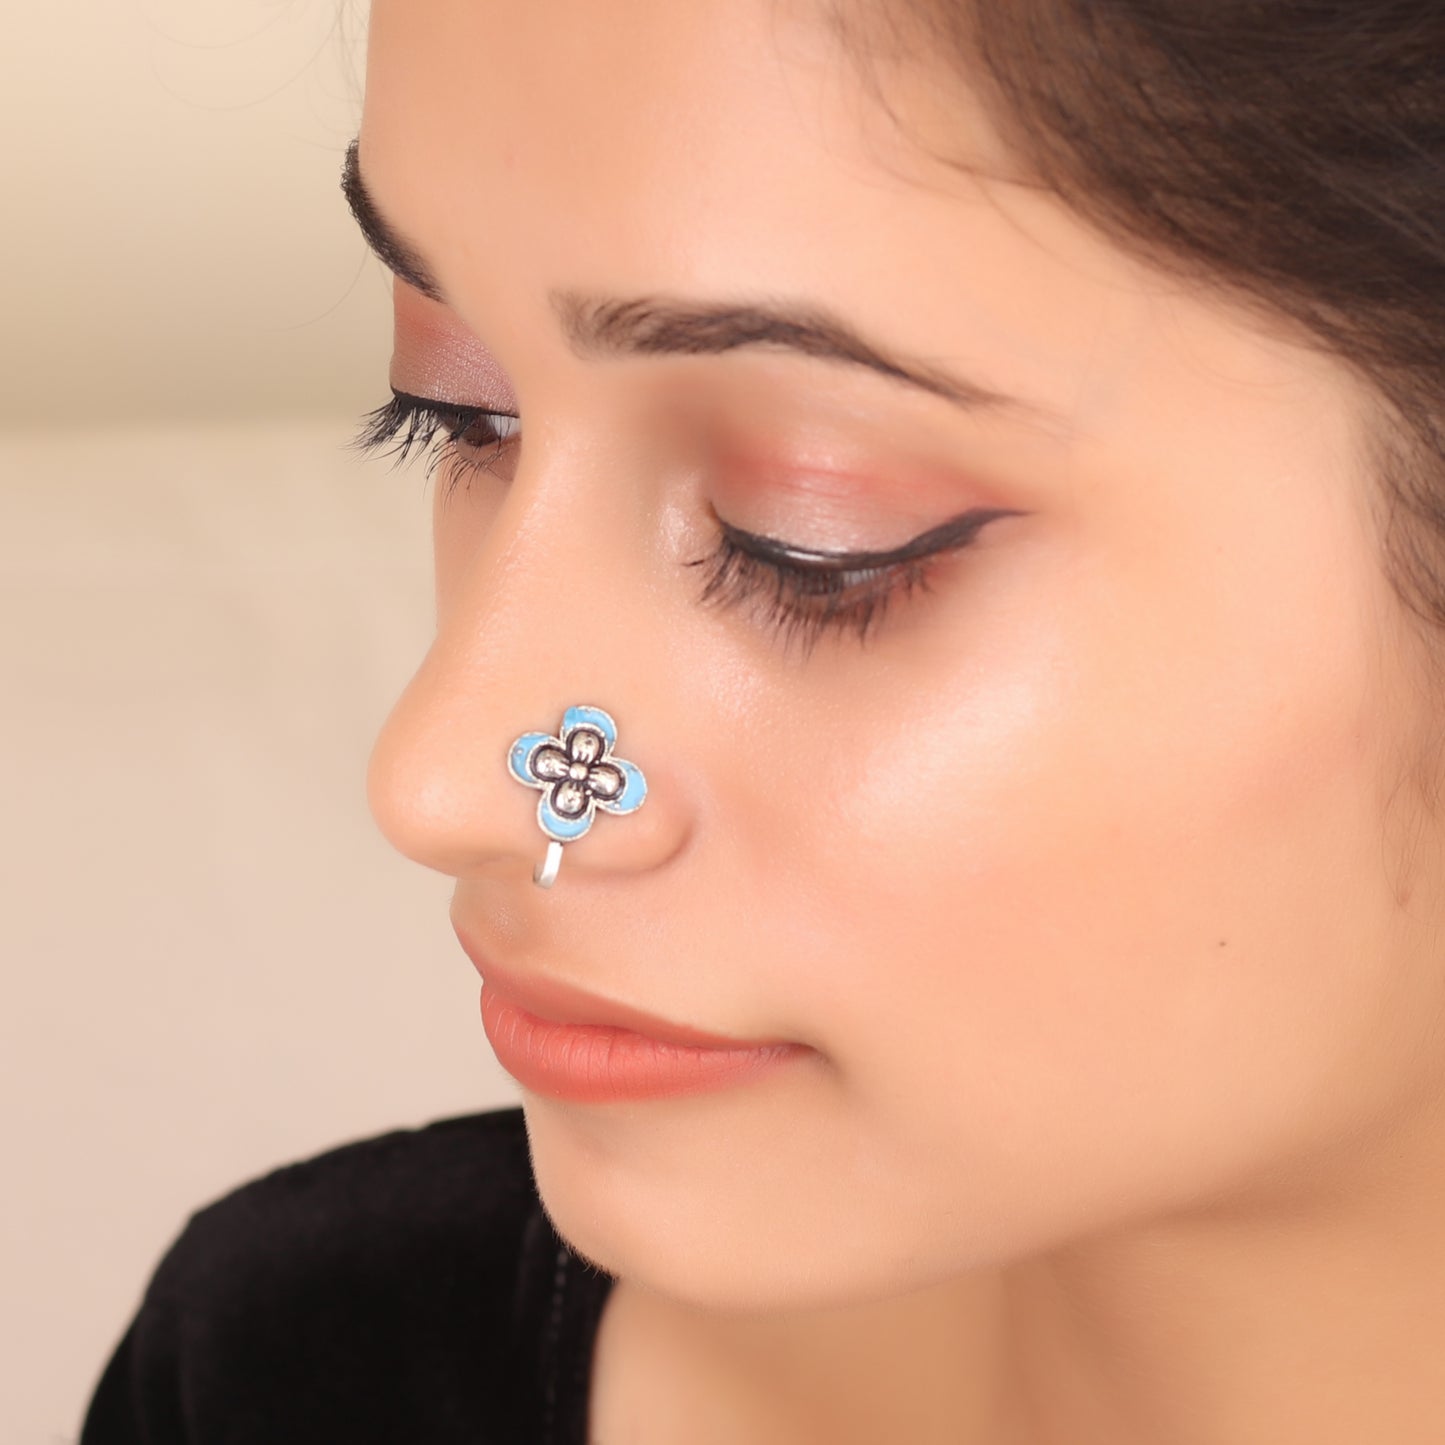 The Butterfly Nose Pin in Sky Blue